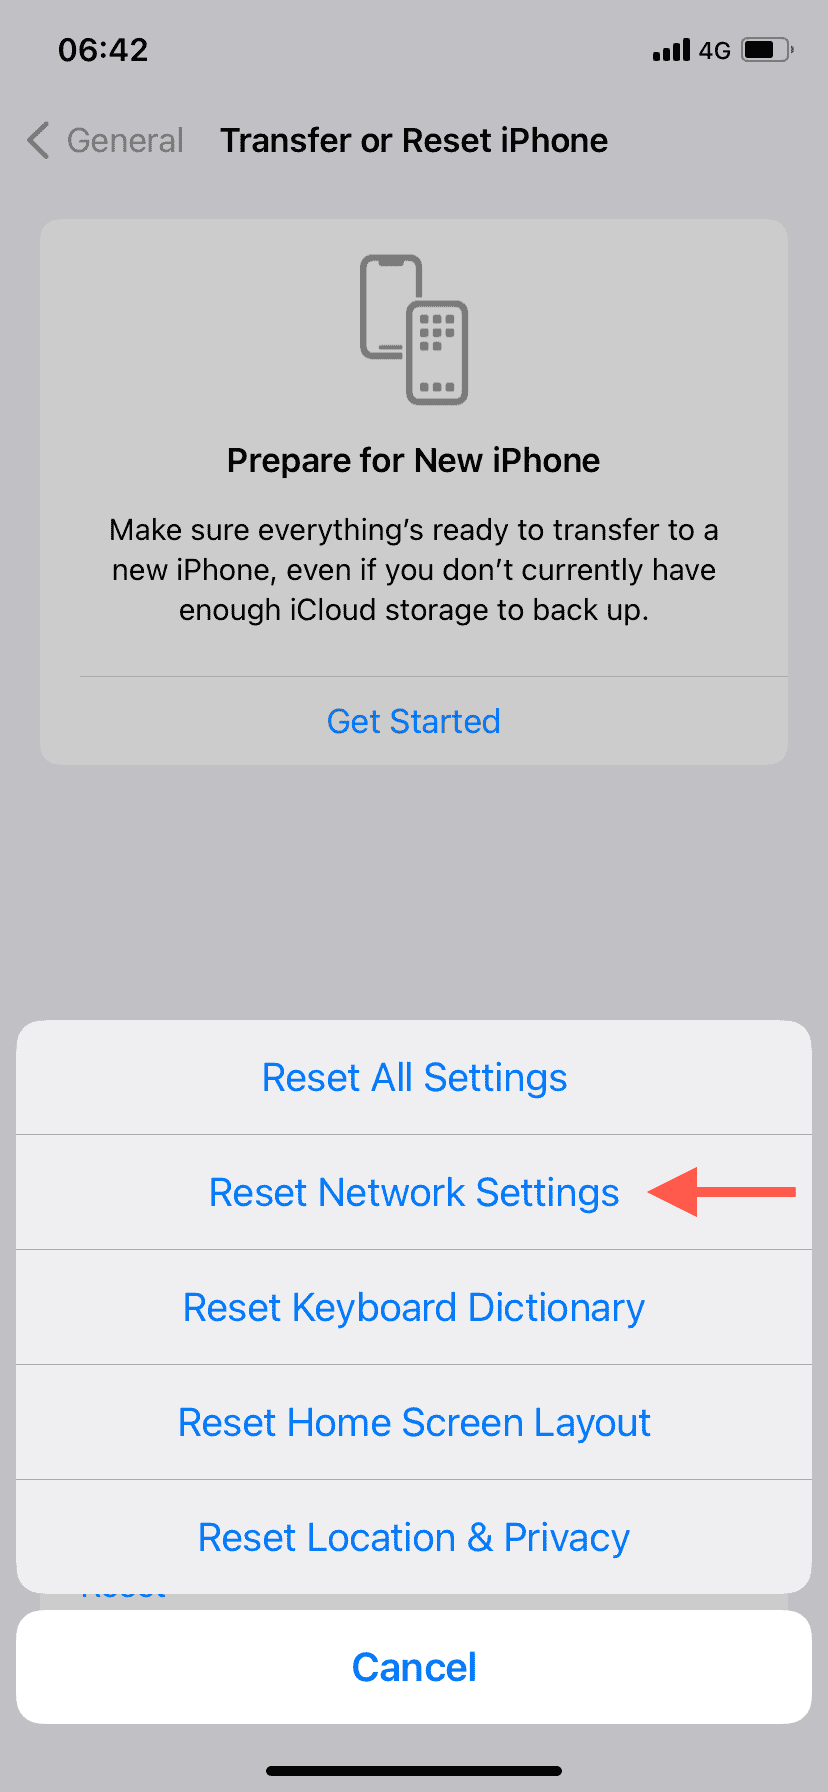 The Reset Network Settings option highlighted in the iPhone's Reset menu.